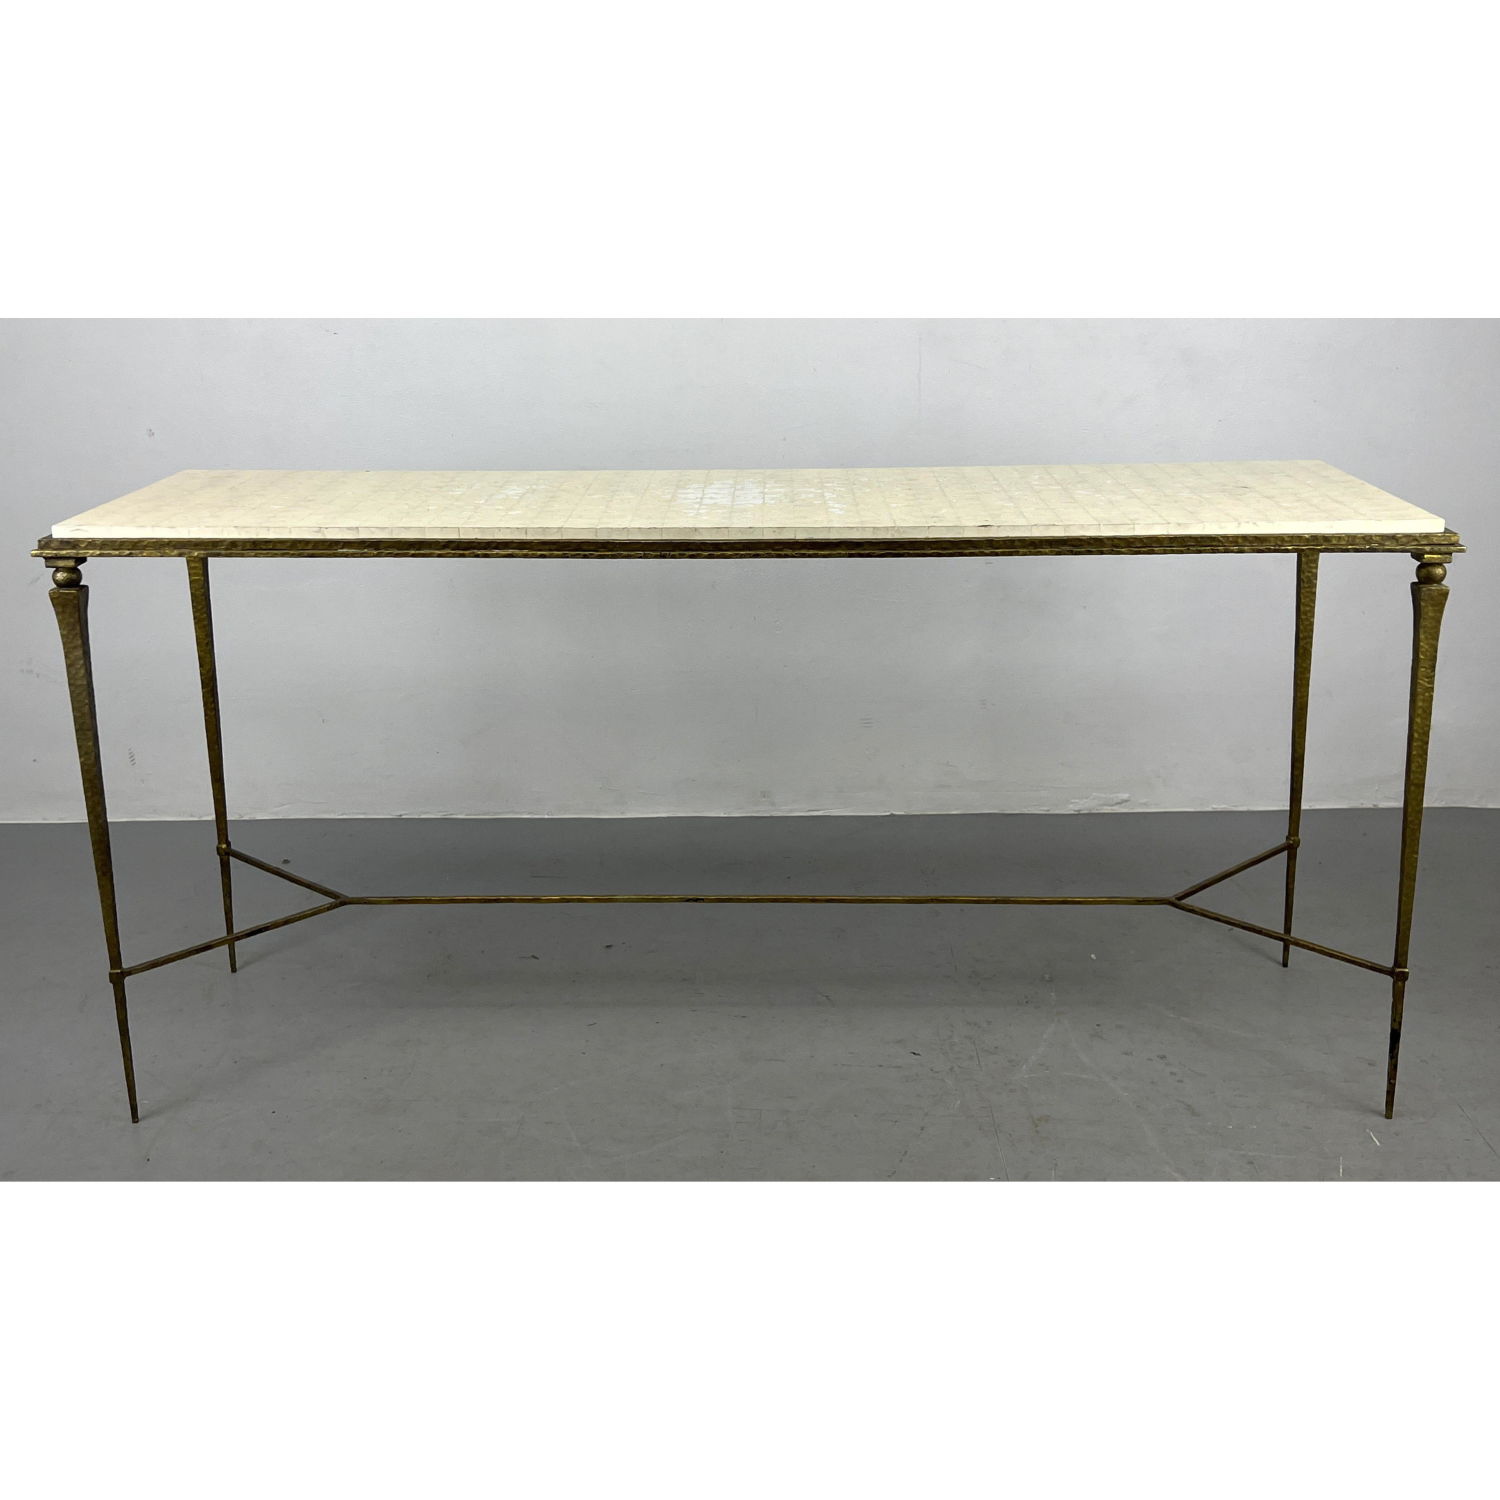 Modernist Hall Console Table. Faux